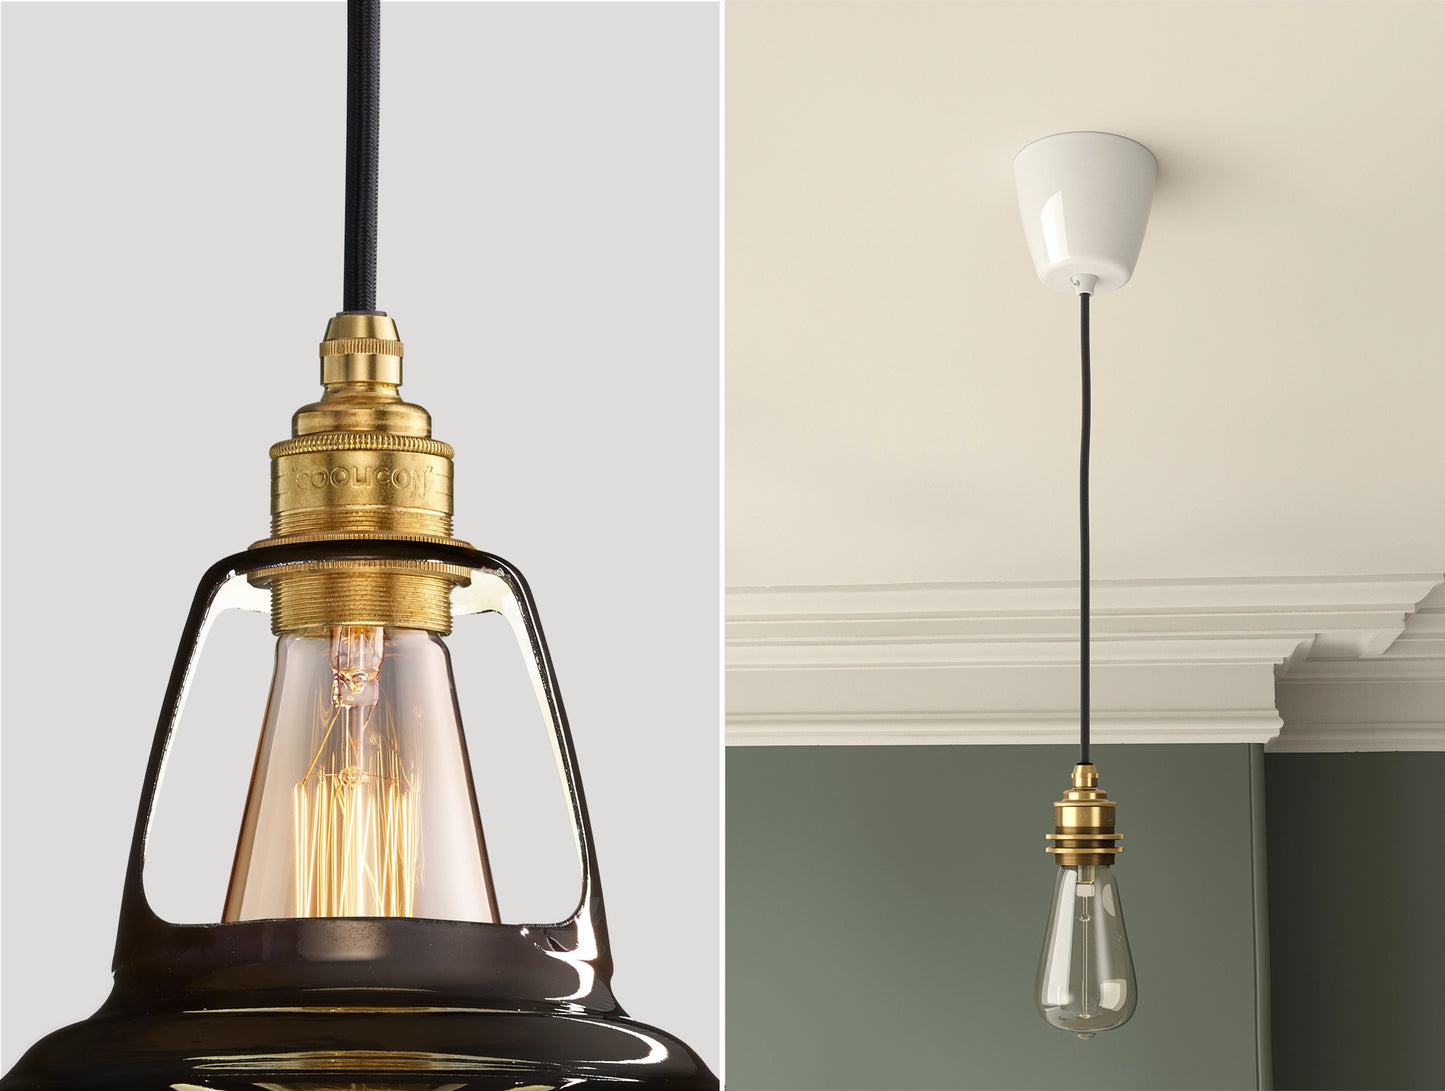 Close up of an E27 Signature Brass suspension set on a Pewter lampshade on the left. On the right, an E27 Brass pendant set with a lightbulb is hanging from the ceiling